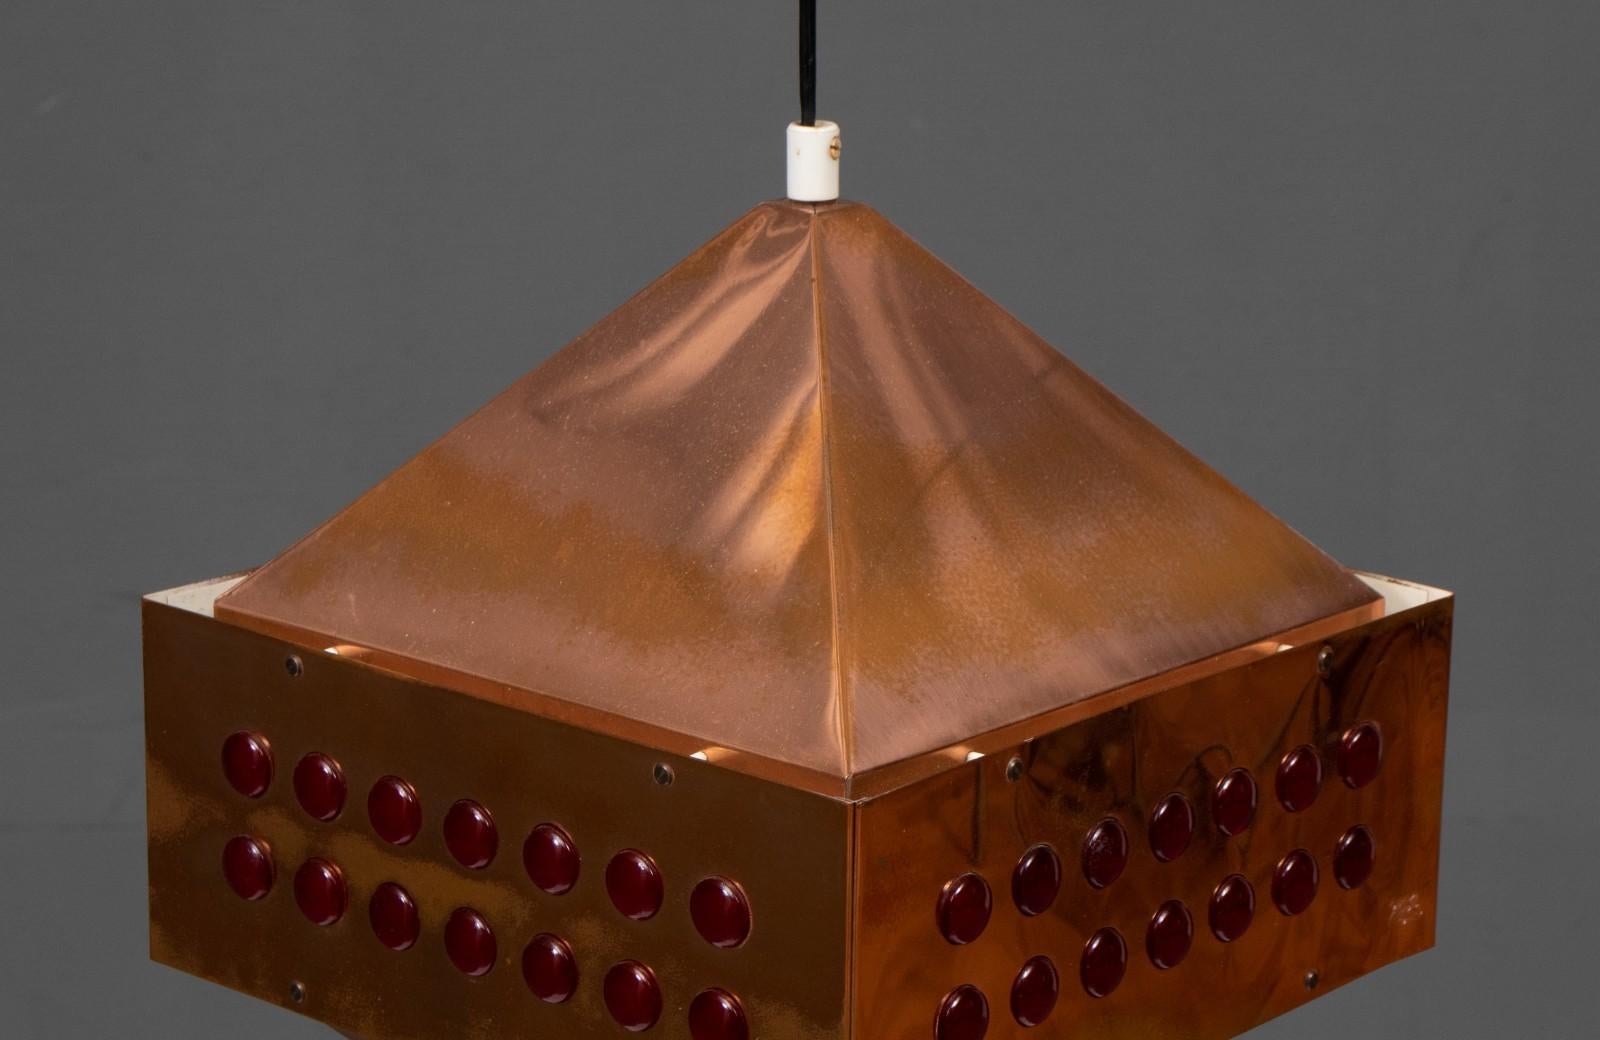 Square copper pendant lamp was designed by Hans-Agne Jakobsson for Markaryd in Sweden in the 1960s. The light spreads from the perforated copper part at the top and the white inside with red glass beads to all sides below. All are original and in